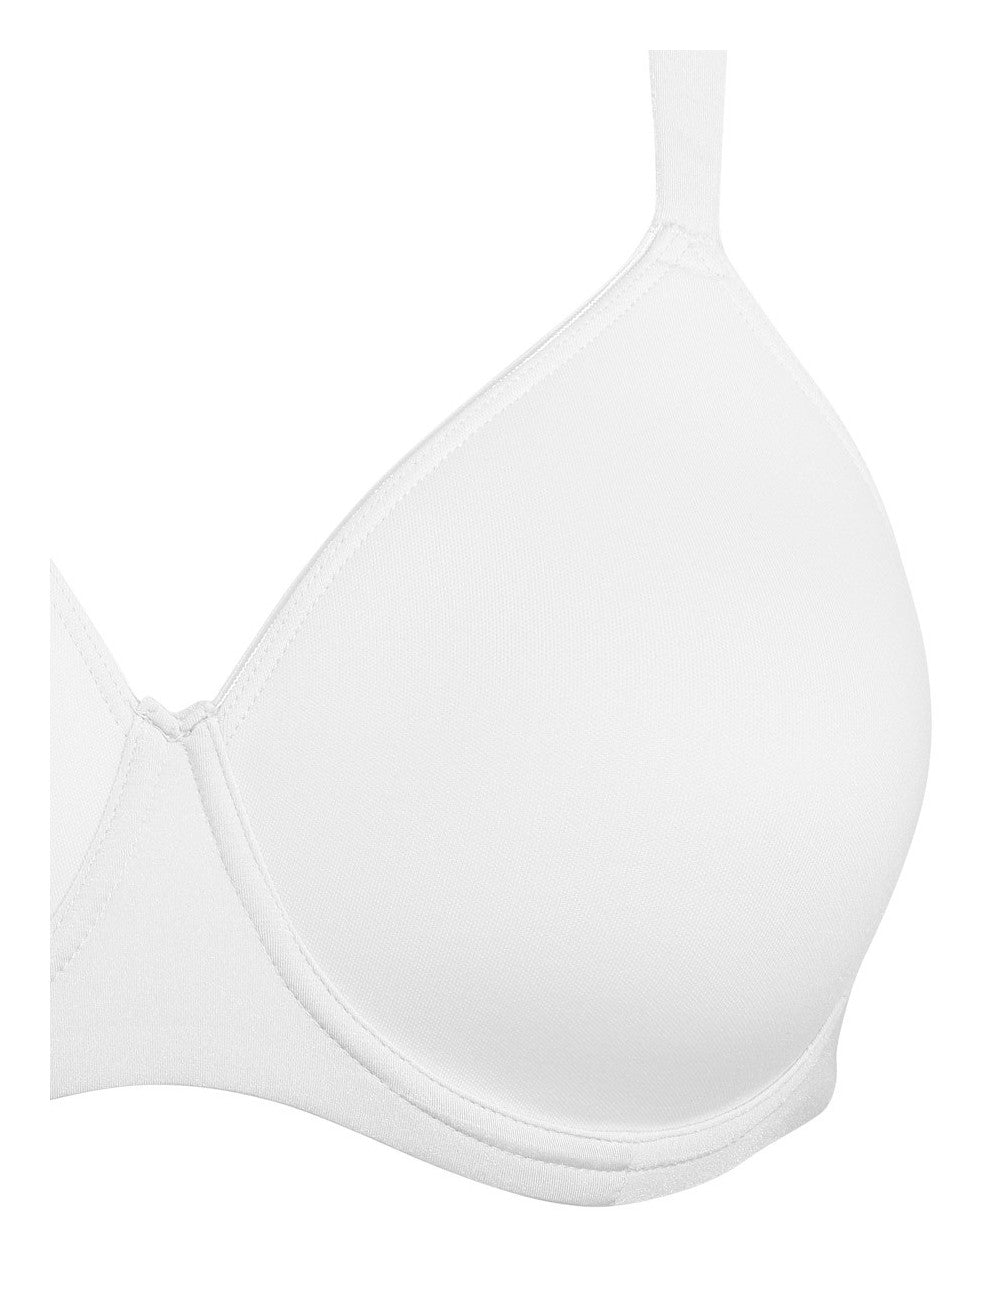 Buy Vanila Lingerie Seamless B Cup Bra for Women & Girls, Moulded Spacer  Cloth in Cup Hosiery Fabric, Beige, 30, Pack of 1 at